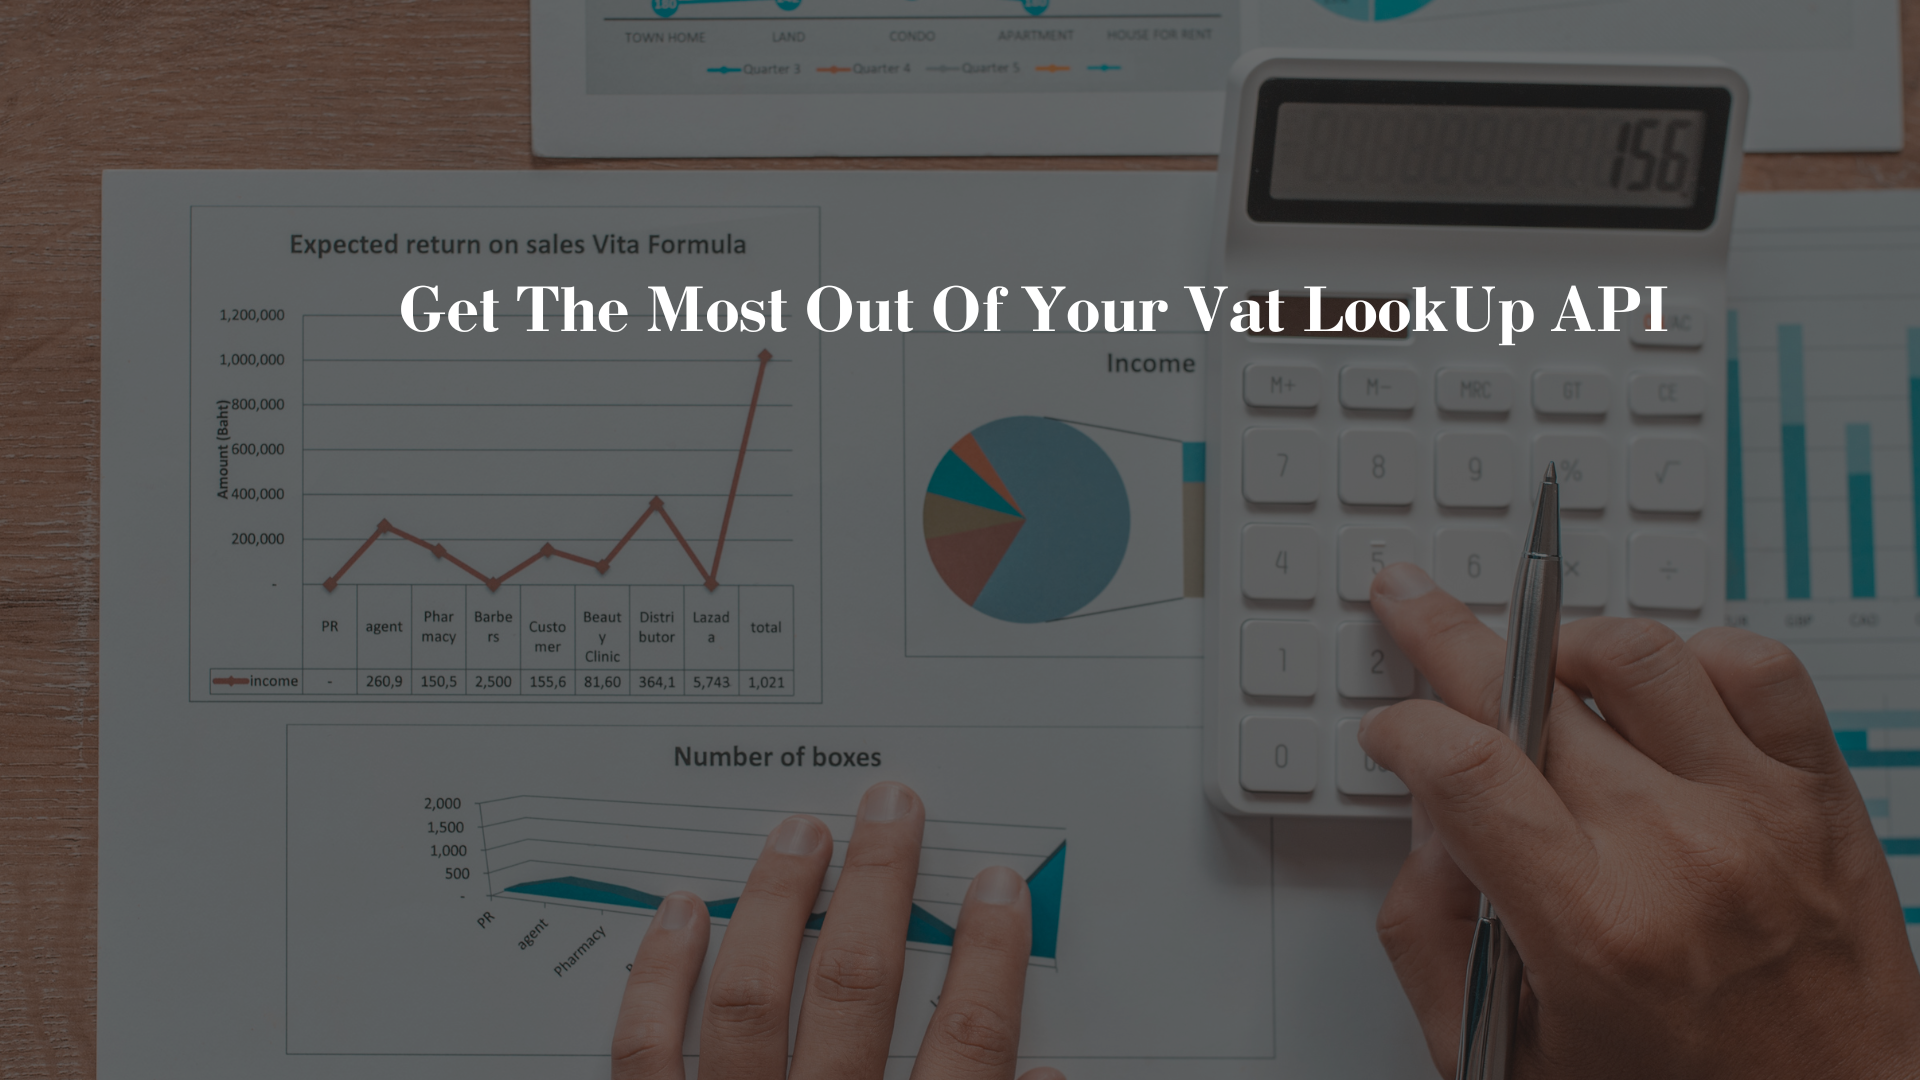 Get The Most Out Of Your Vat LookUp API